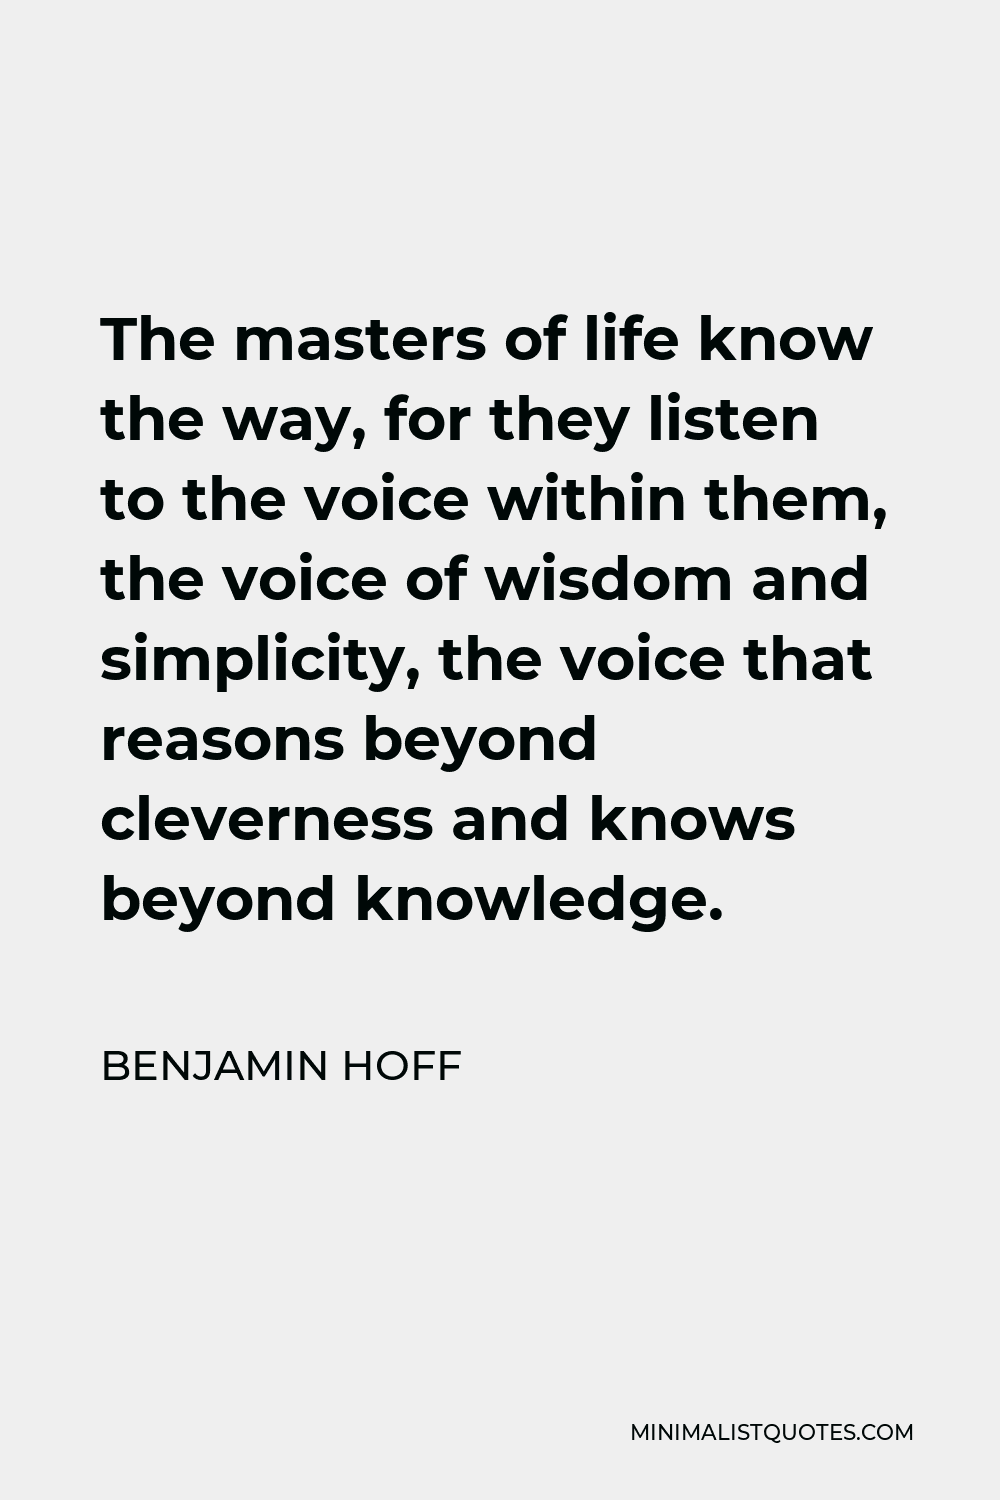 Benjamin Hoff Quote - The masters of life know the way, for they listen to the voice within them, the voice of wisdom and simplicity, the voice that reasons beyond cleverness and knows beyond knowledge.